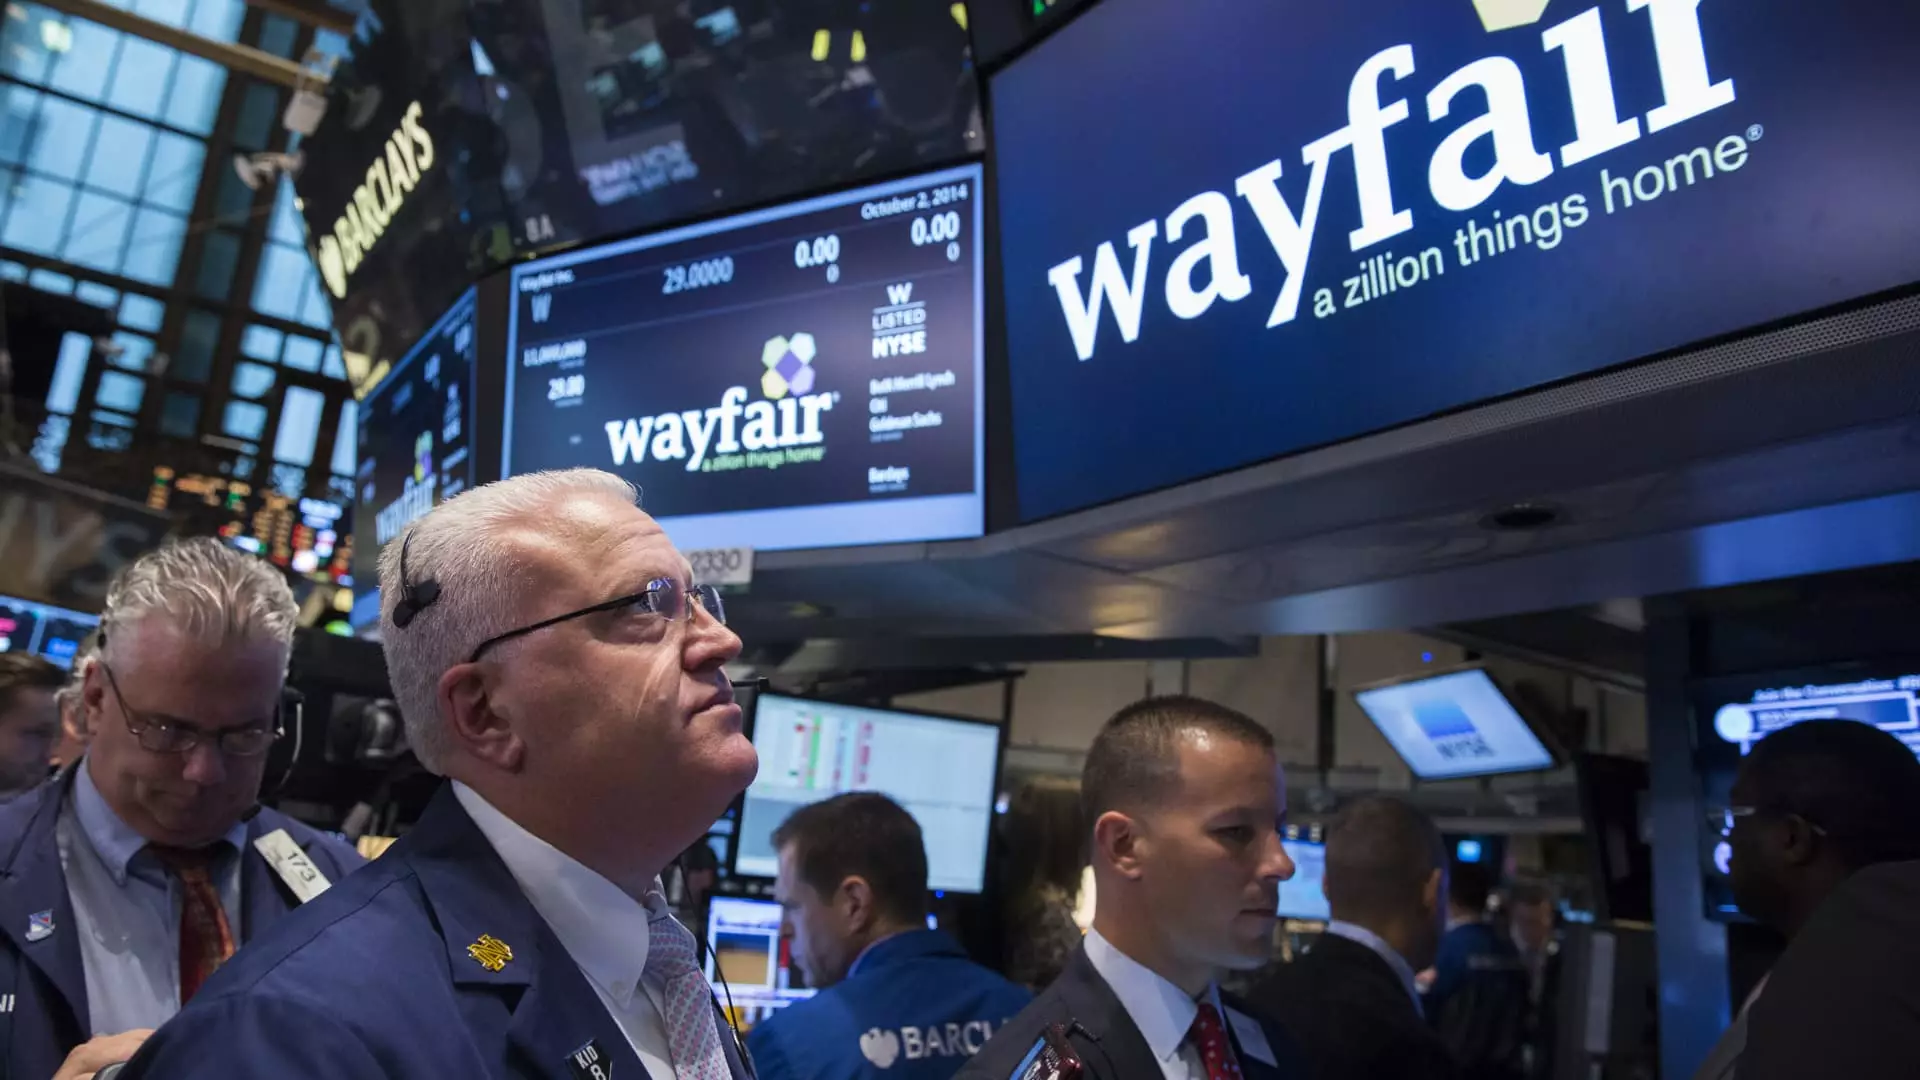 Wayfair’s First Quarter Results and Path to Profitability